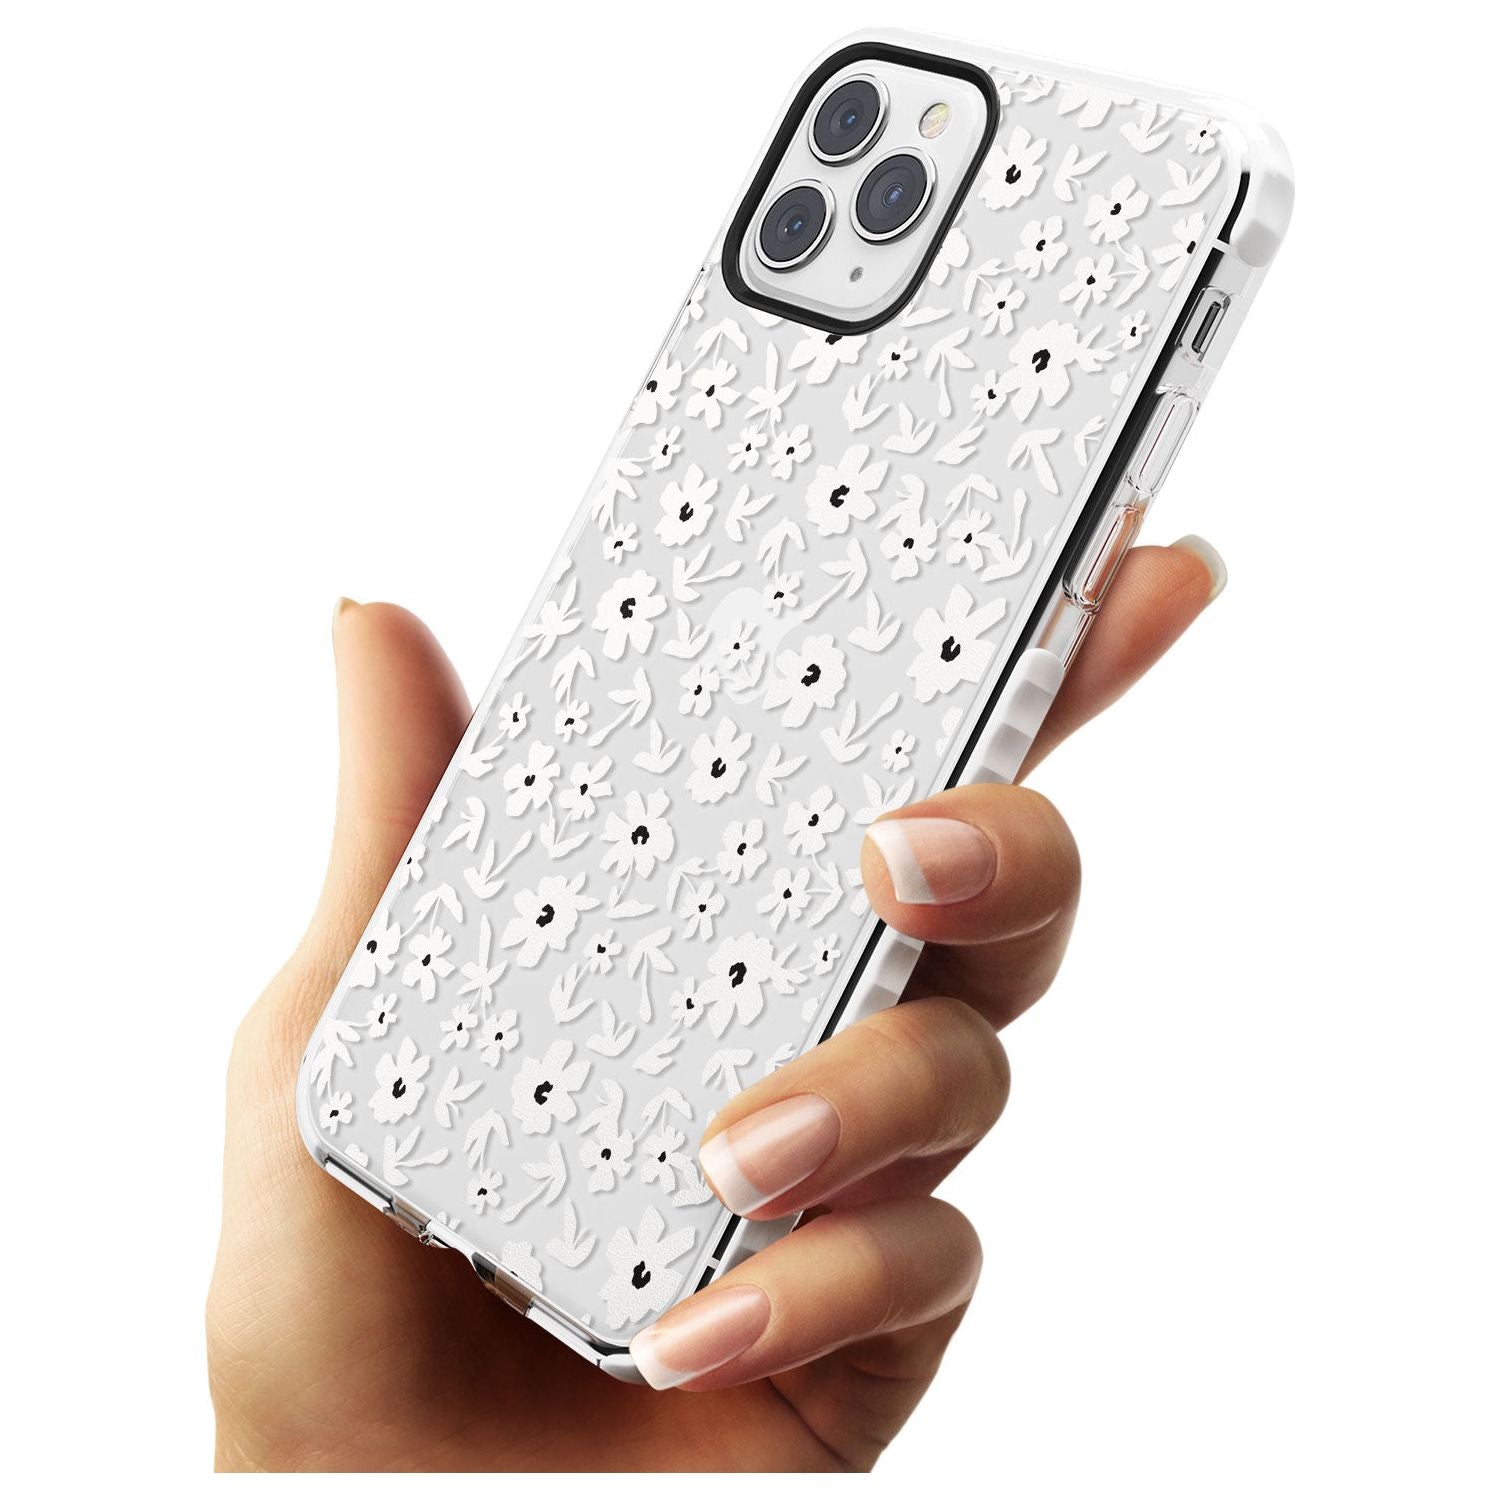 Floral Print on Clear - Cute Floral Design Slim TPU Phone Case for iPhone 11 Pro Max